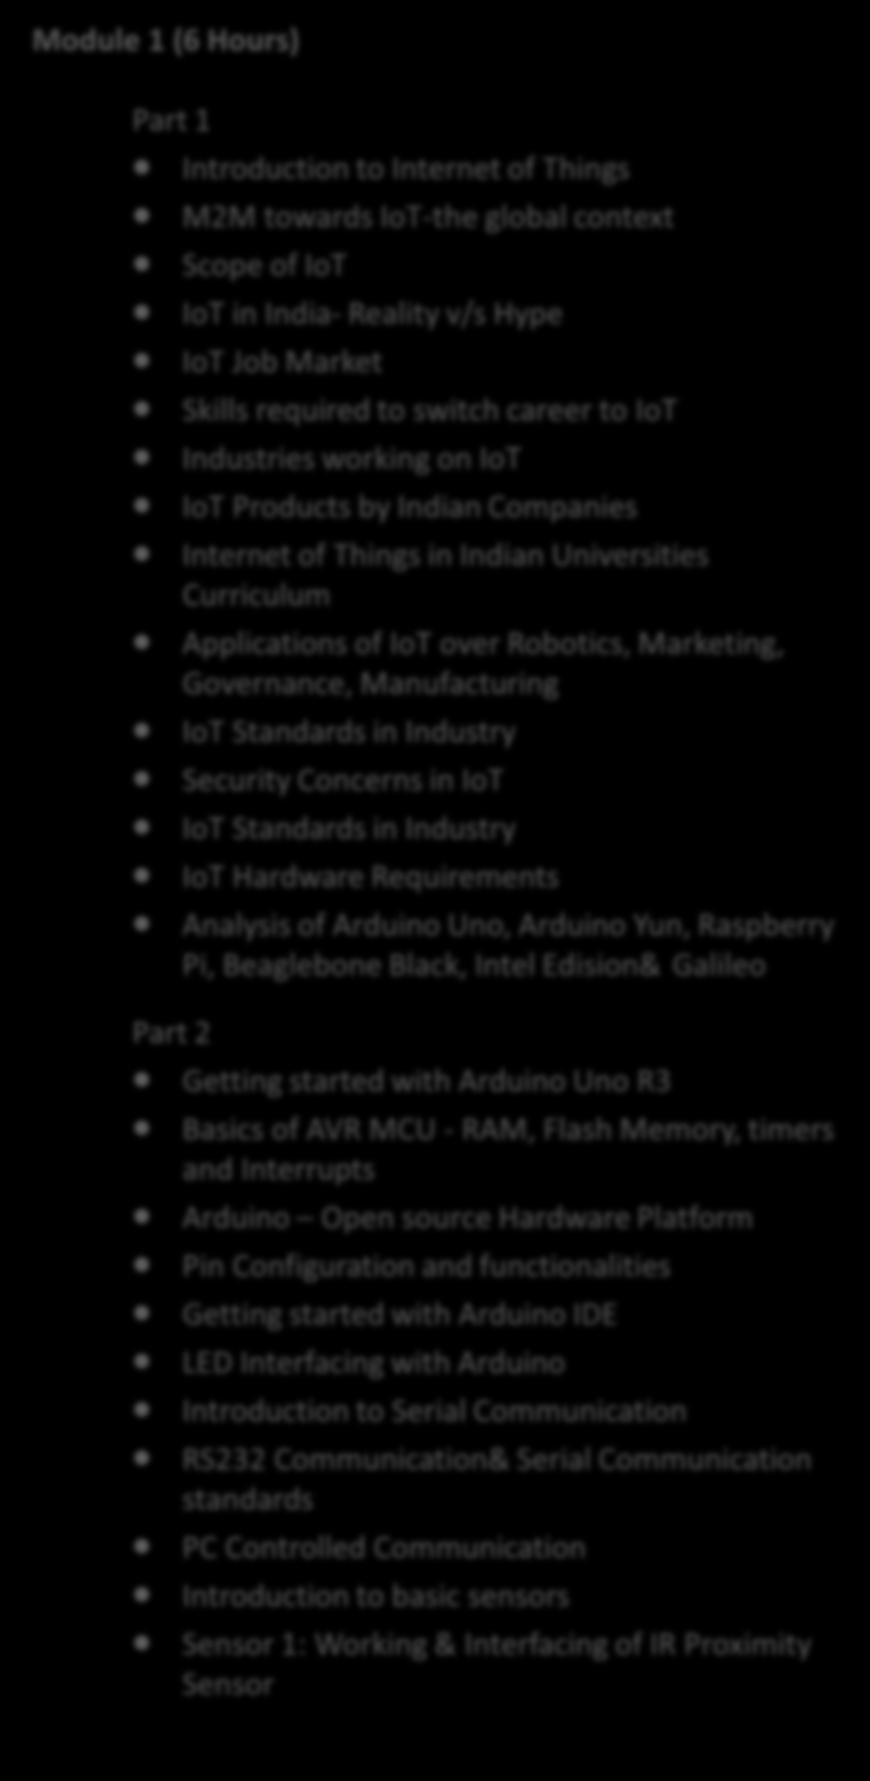 Module 1 (6 Hours) Introduction to Internet of Things M2M towards IoT-the global context Scope of IoT IoT in India- Reality v/s Hype IoT Job Market Skills required to switch career to IoT Industries